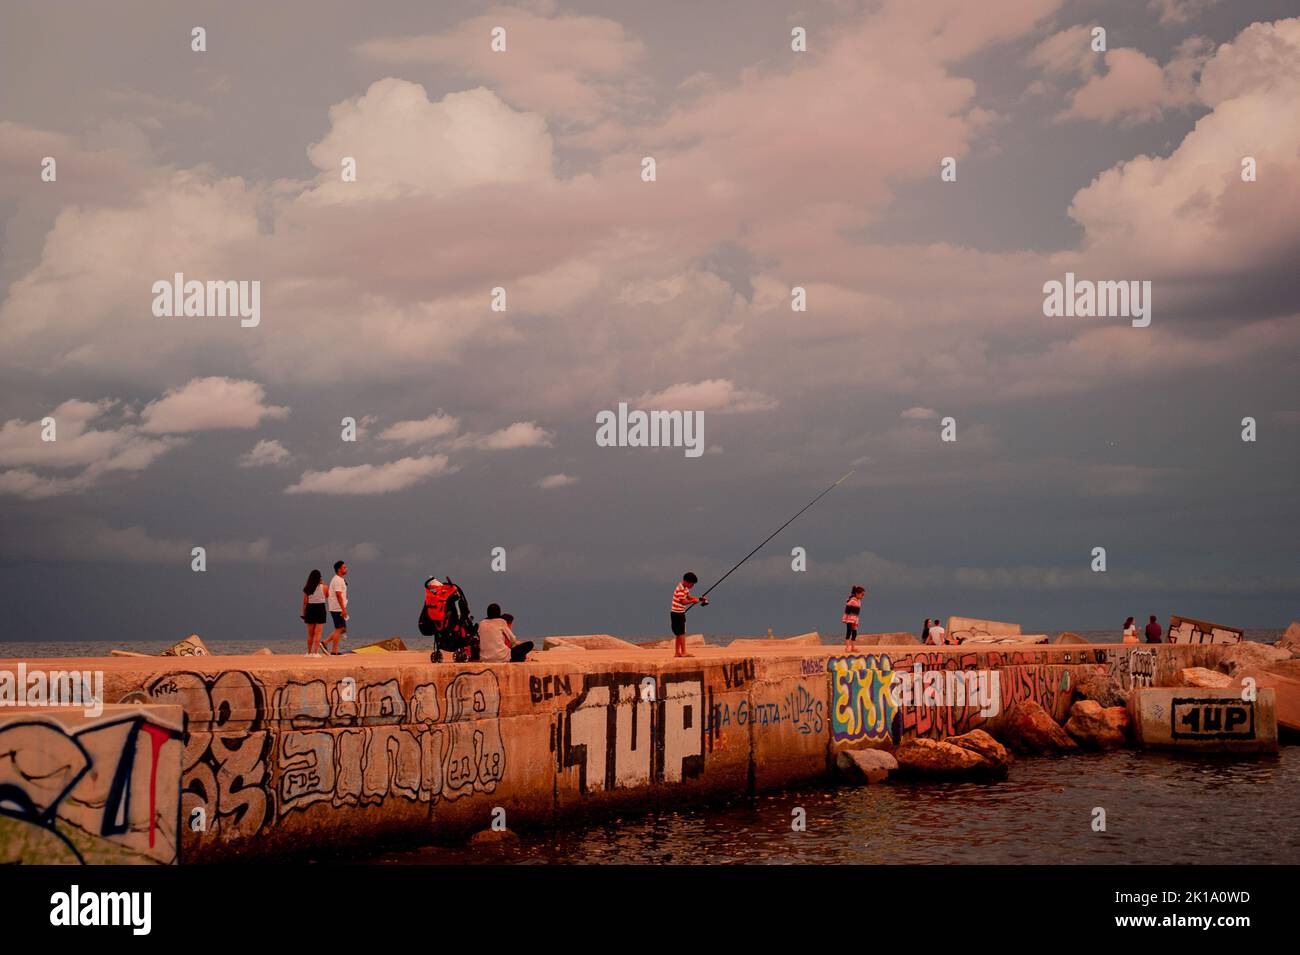 September 16, 2022, Barcelona, Spain: Young boy fishes from a breakwater as stormy clouds roll across the sky in Barcelona, Spain. Credit: Jordi Boixareu/Alamy Live News Stock Photo